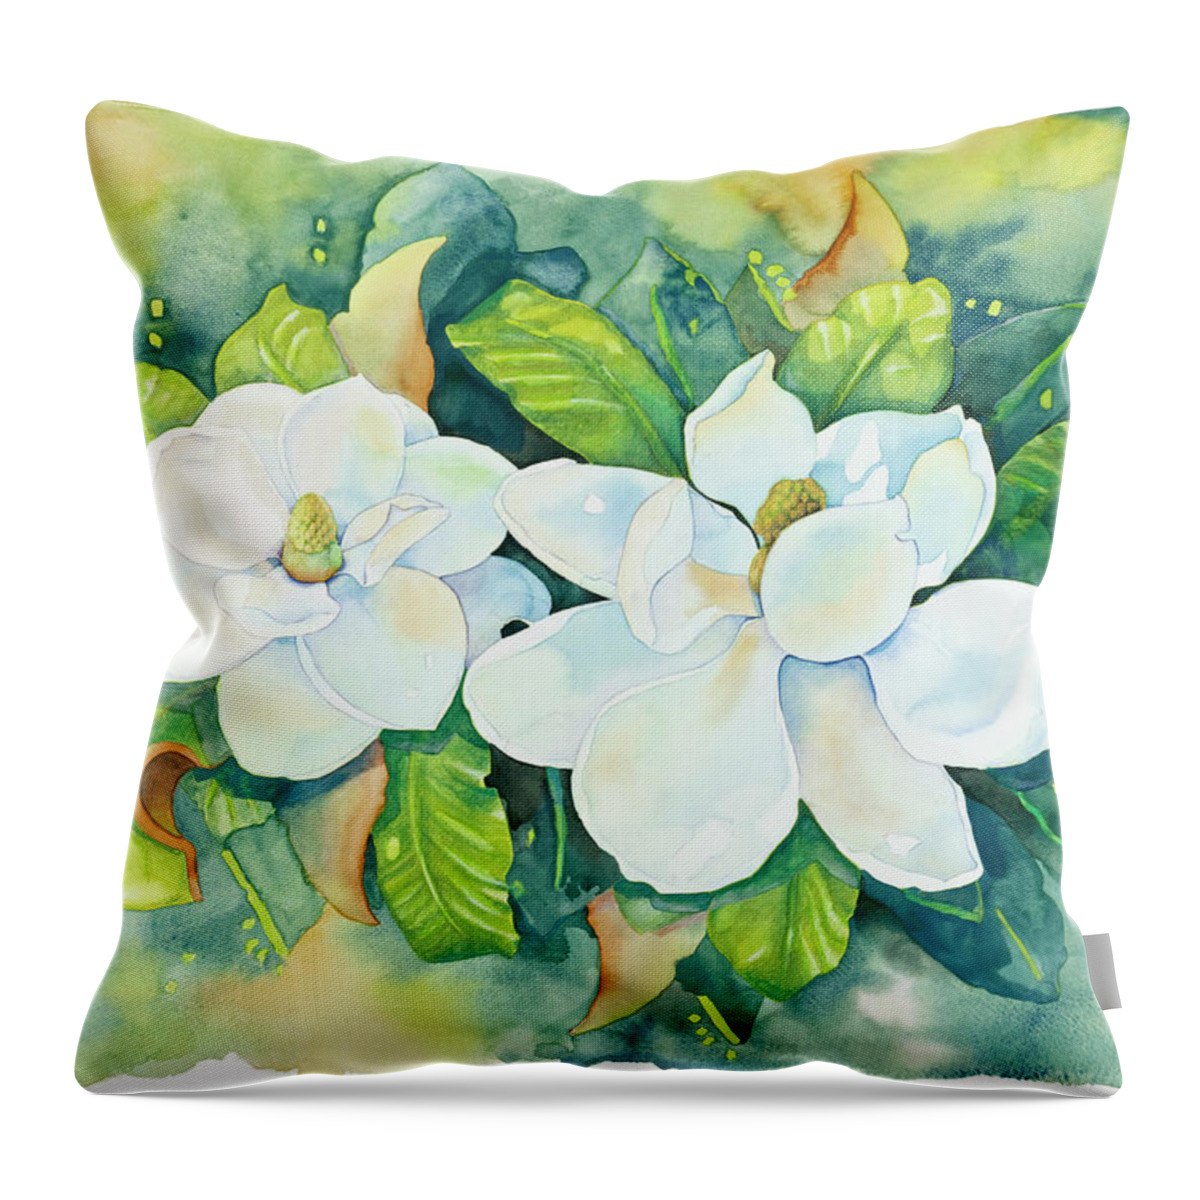 Magnolias Throw Pillow featuring the painting Magnolias by Cathy Locke